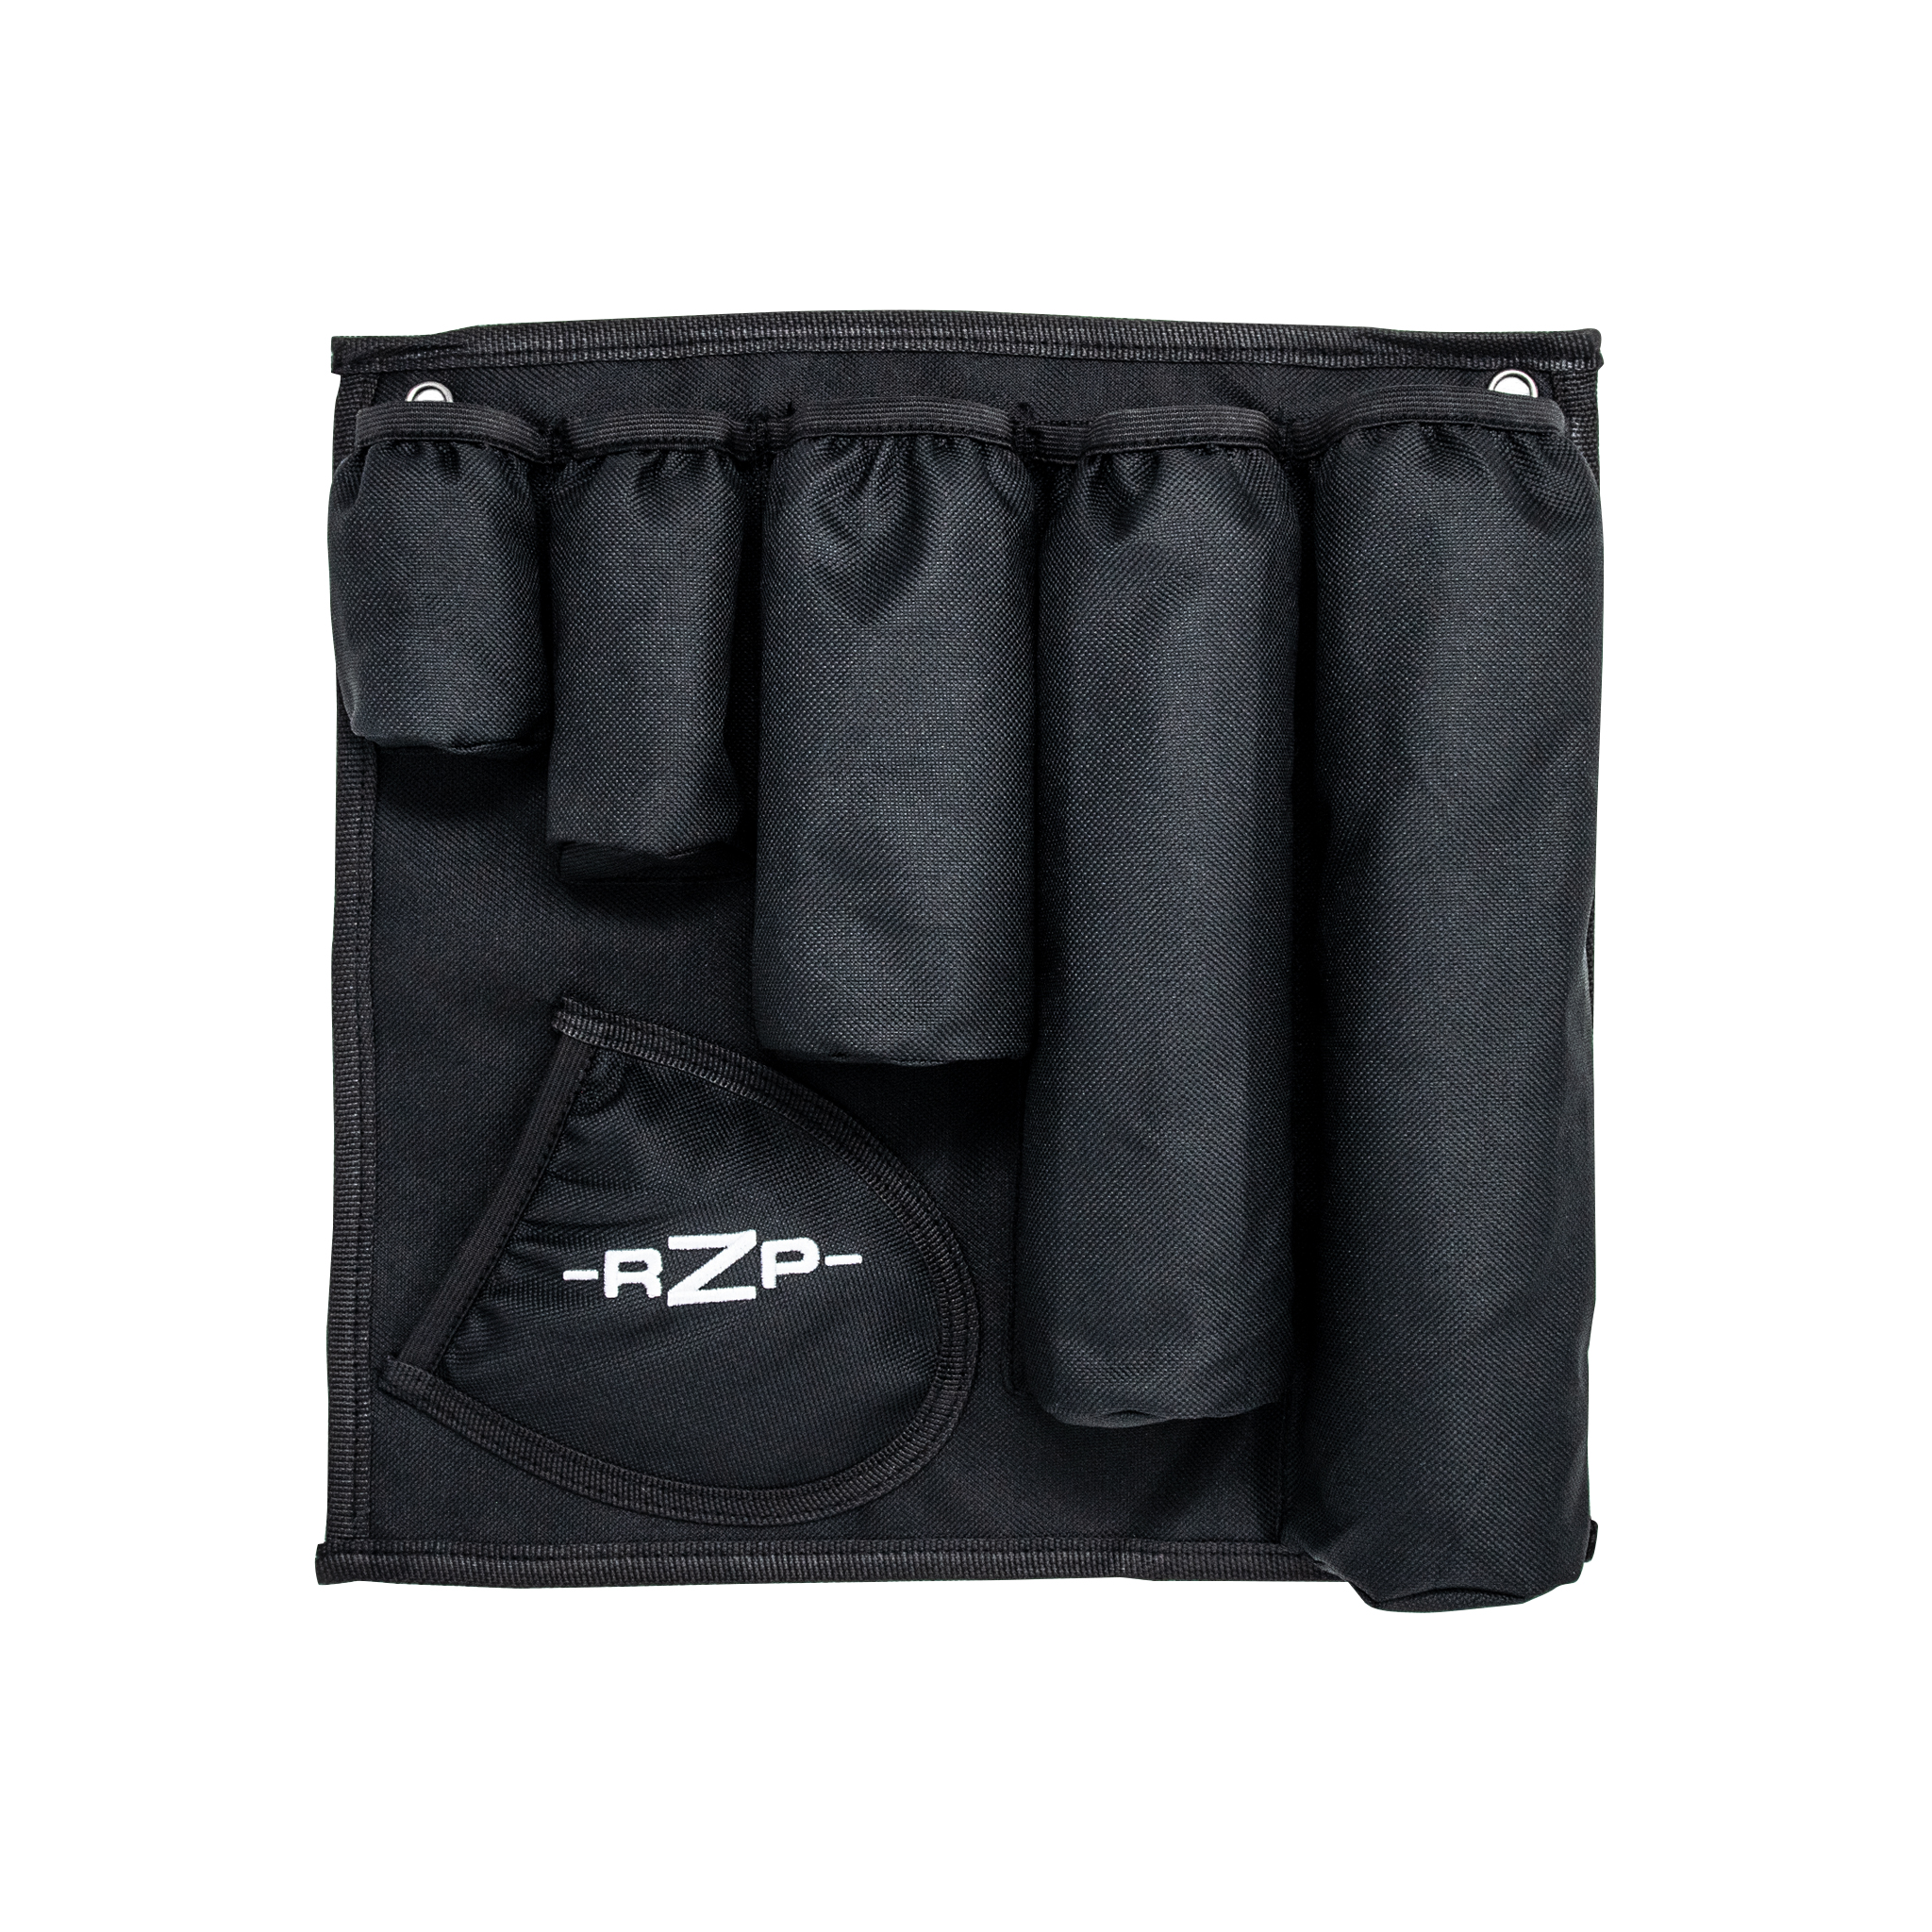 Magnetic base Zip Tie Organizer RZG 500 zip ties and flush cutters included 